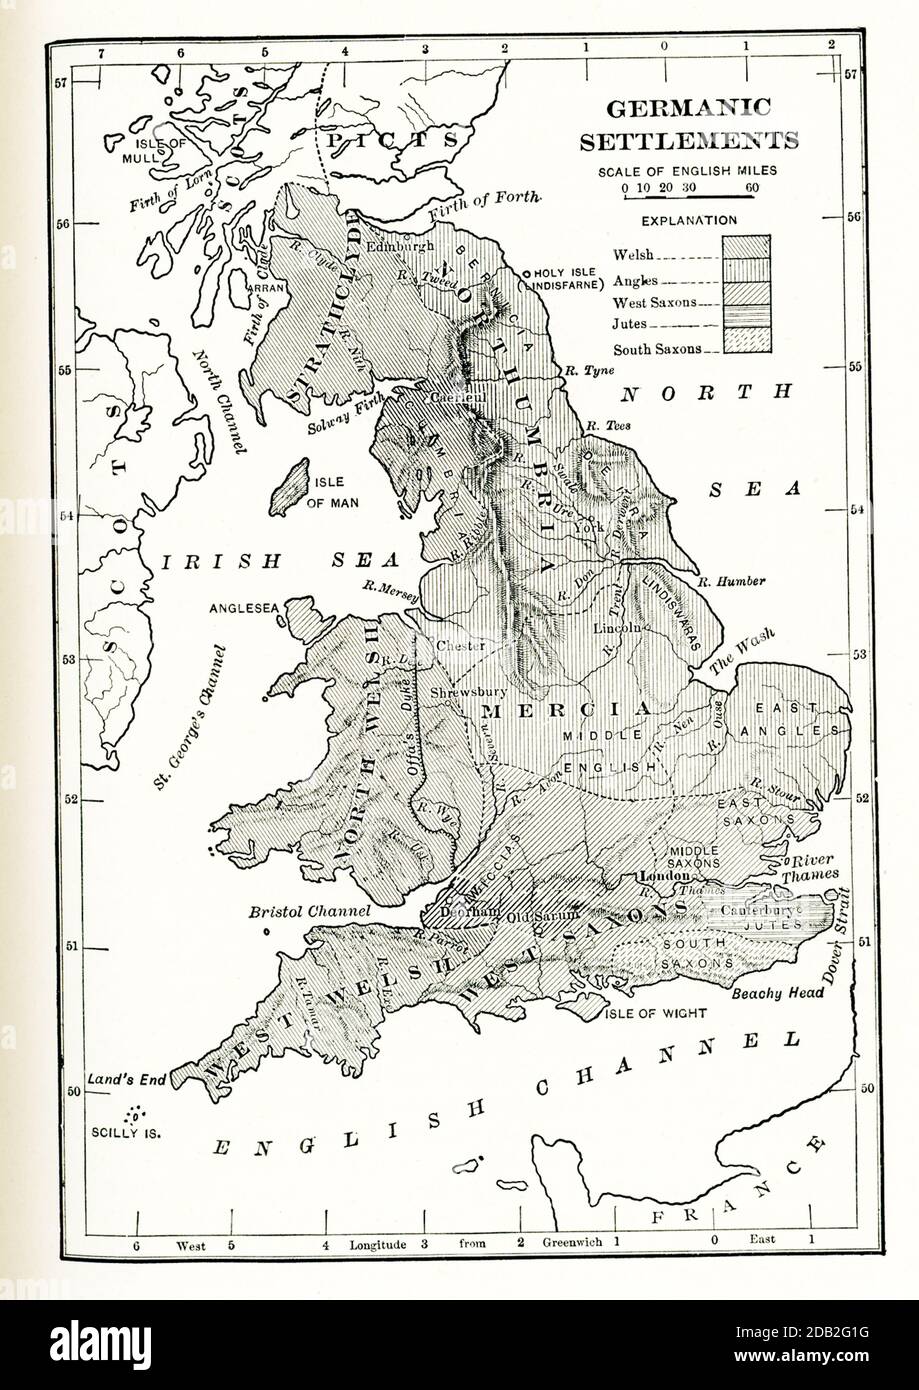 Germanic Settlements in England. This map shows Germanic settlements in England in ancient times. The shaded in areas are: Welsh, Angles, West Saxons, Jutes, South Saxons. Stock Photo